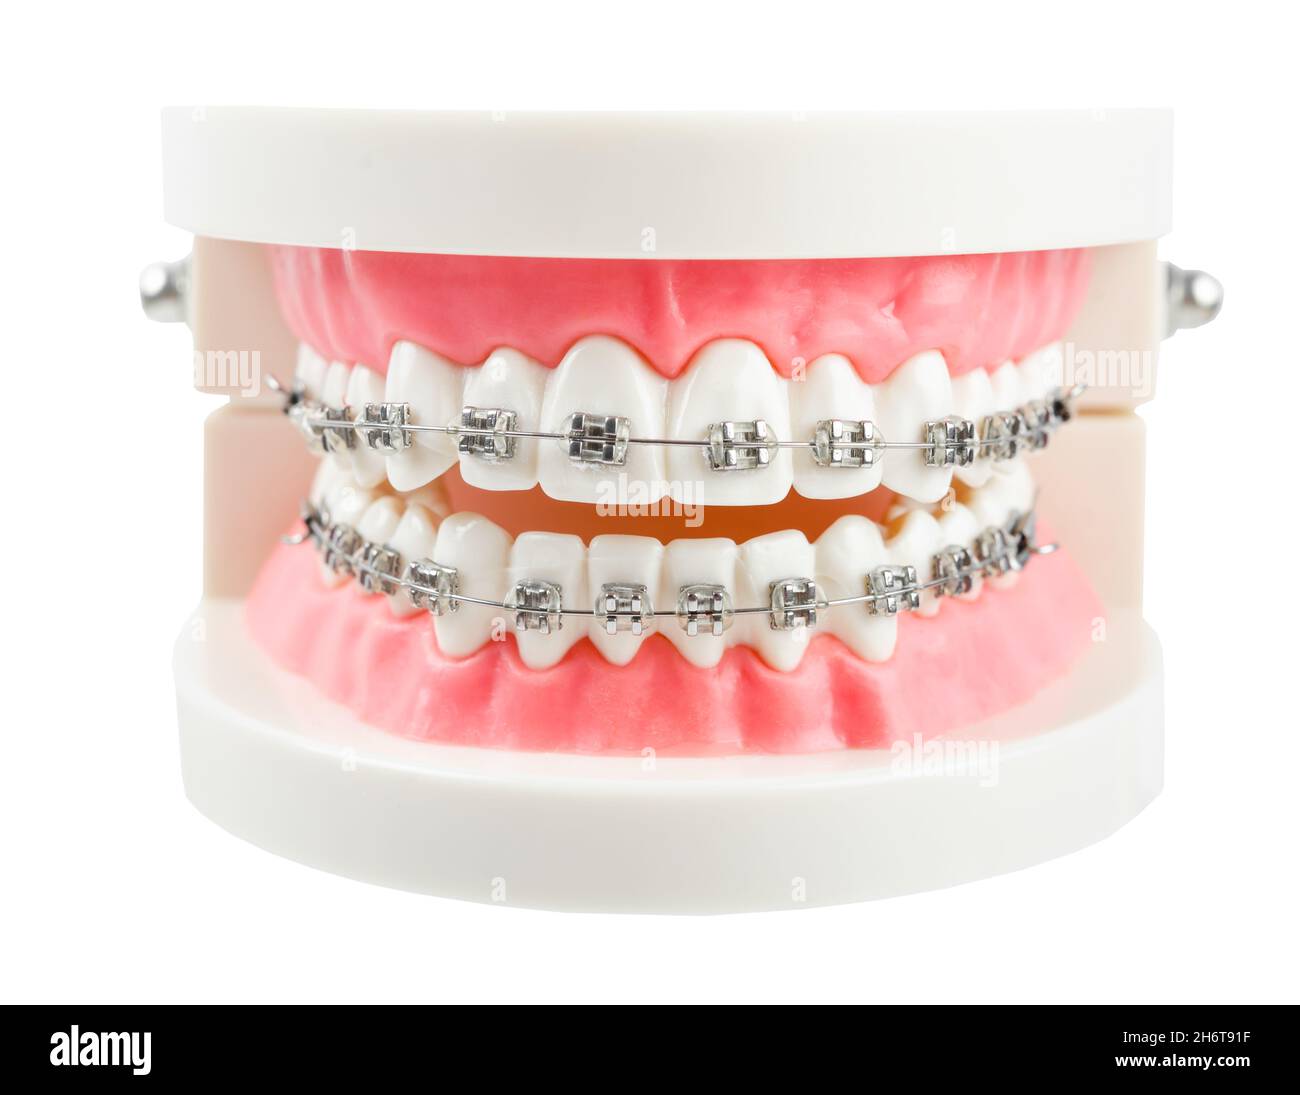 Teeth model wire dental braces isolated on white background, save clipping path. Stock Photo